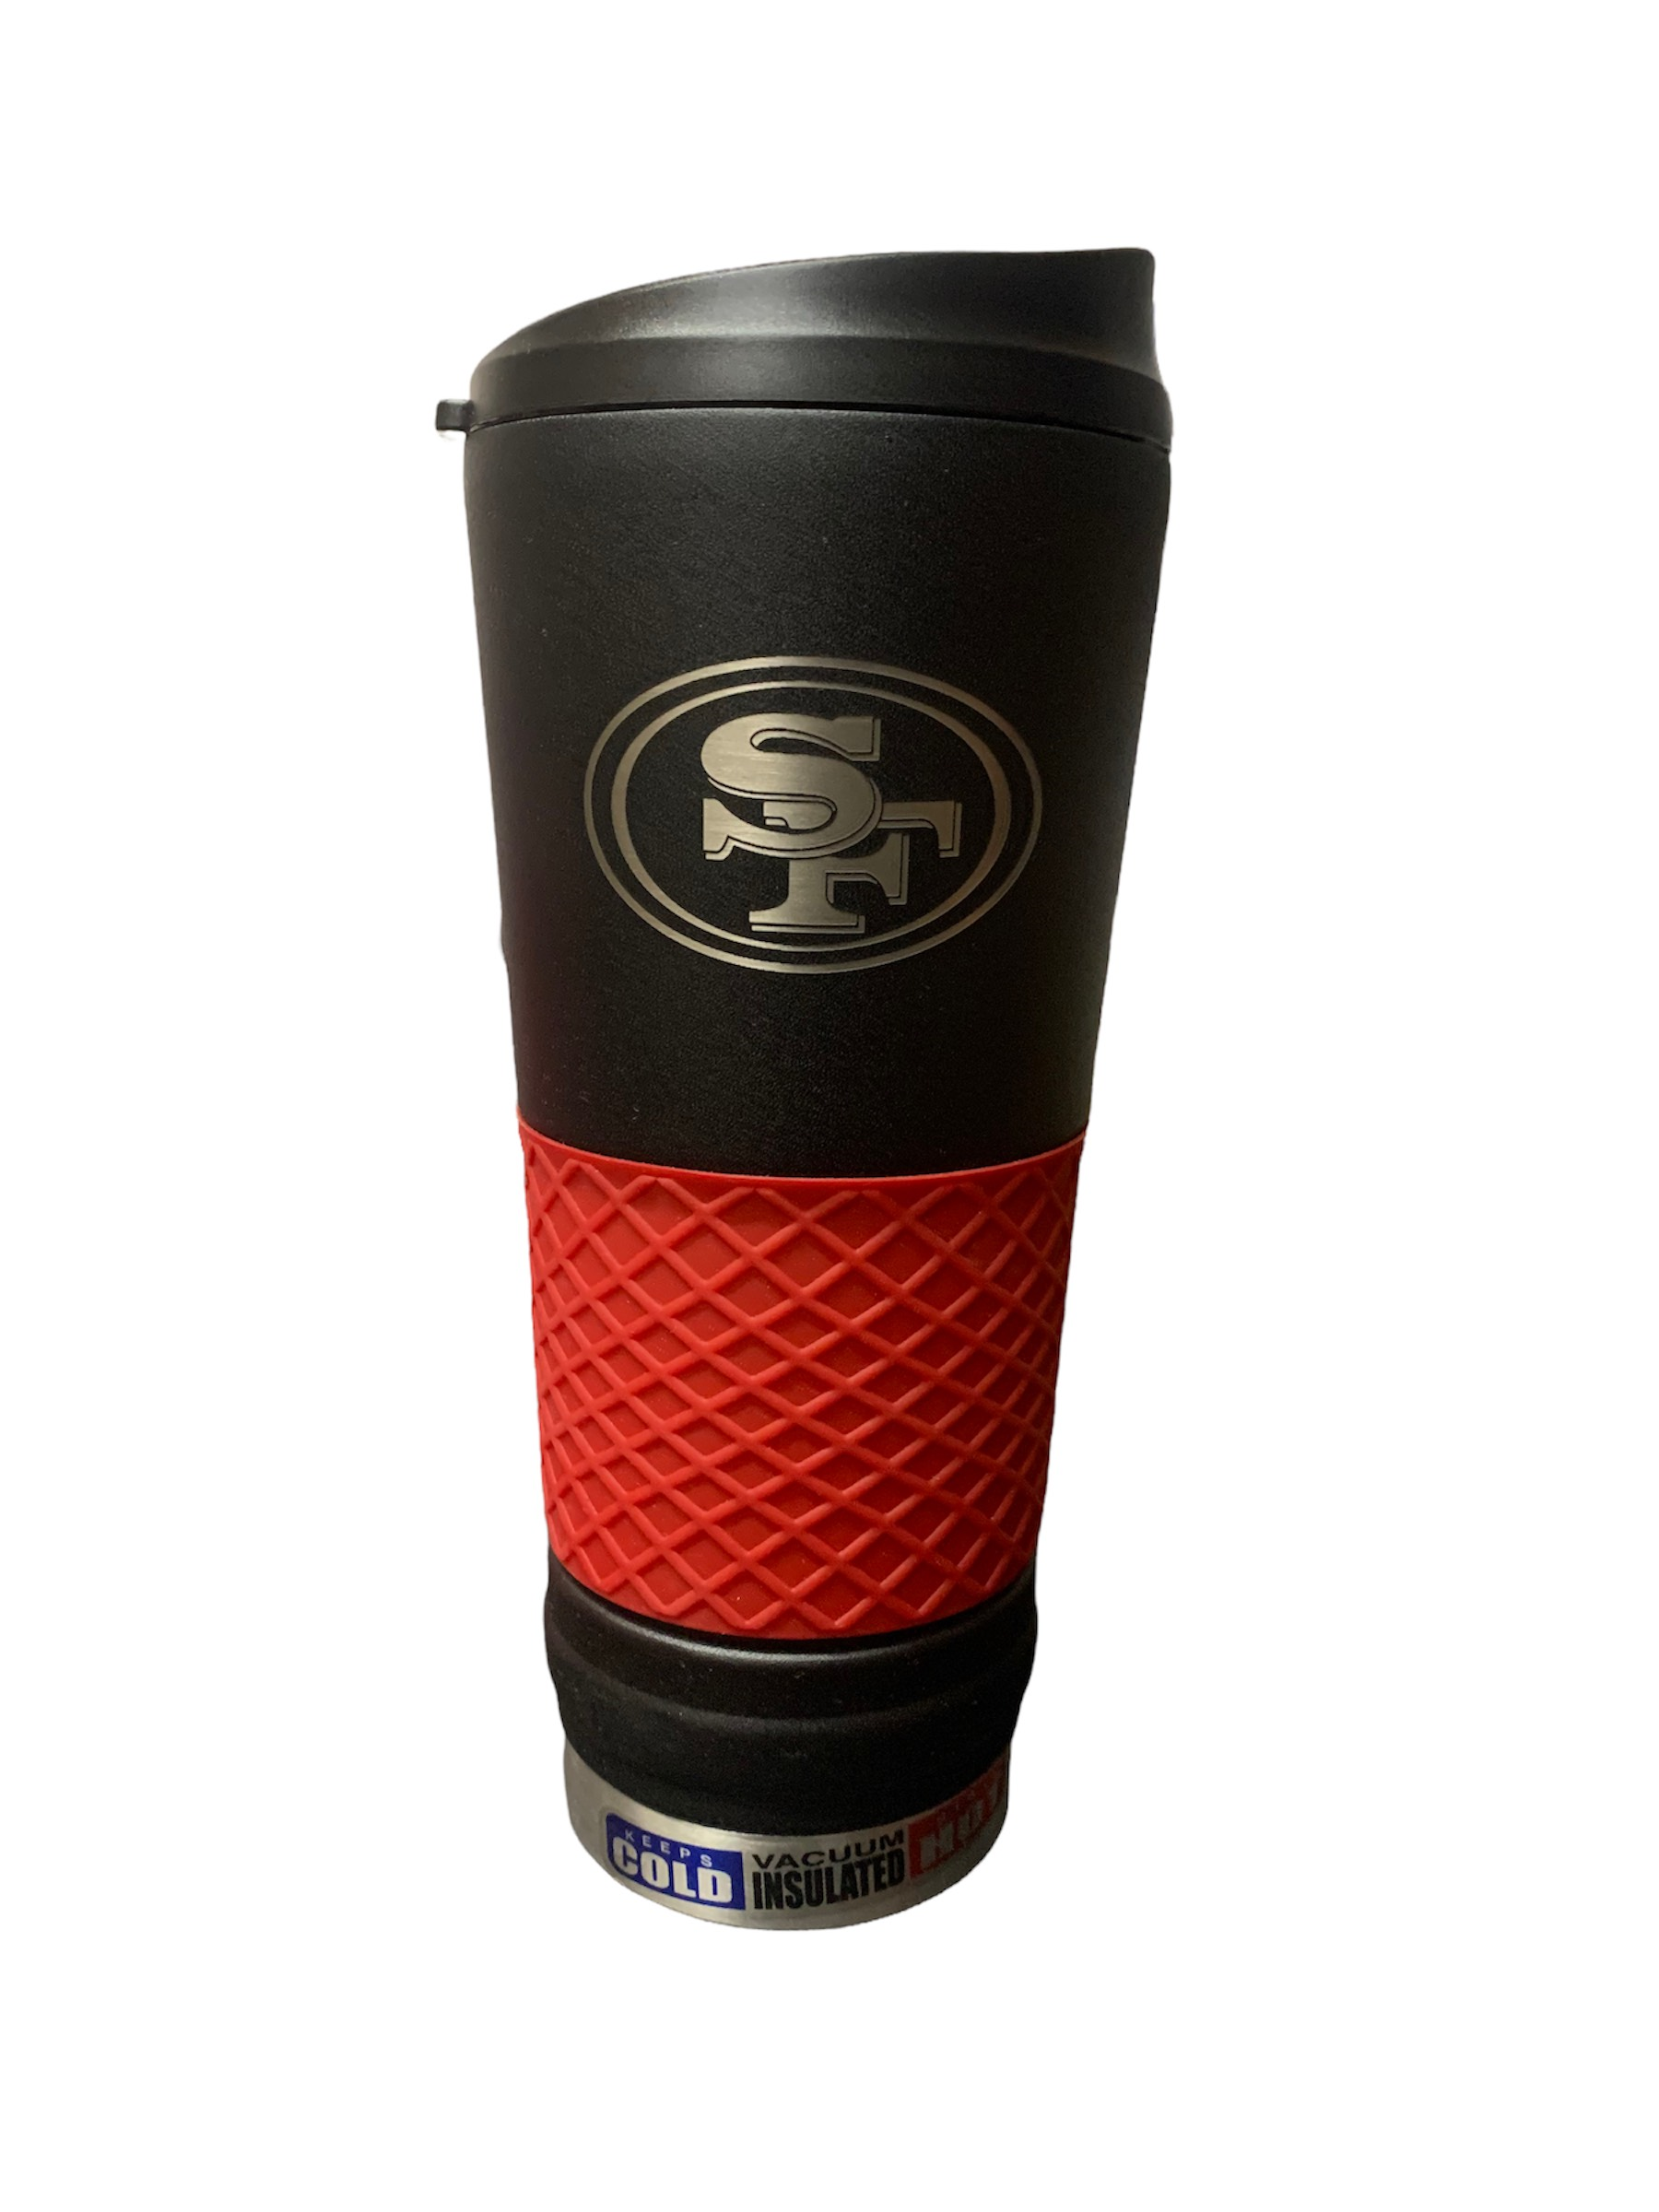 NFL San Francisco 49ers Personalized 30 oz Black Stainless Steel Tumbler